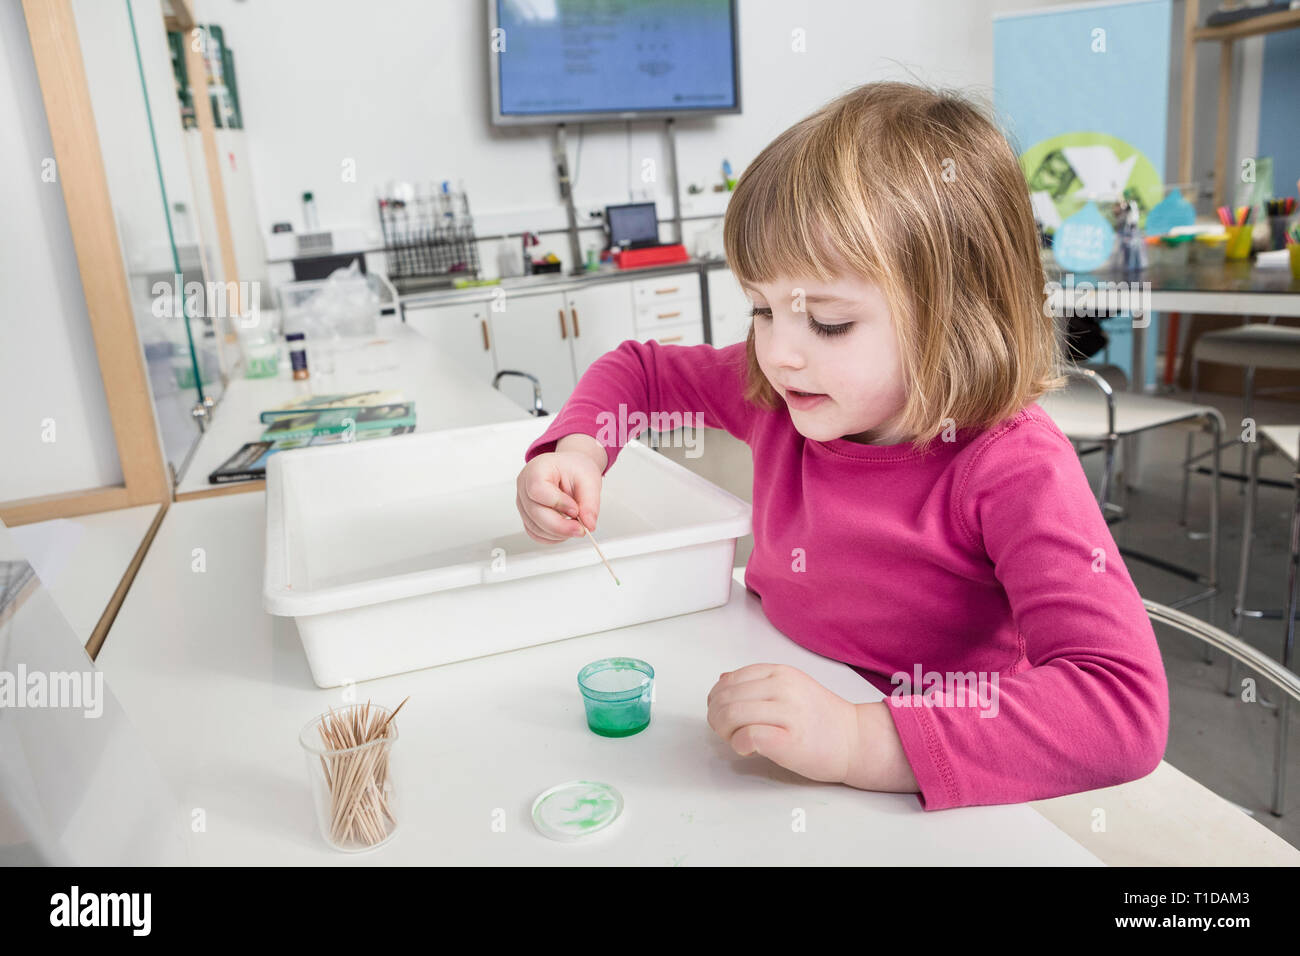 Young girl doing science experiments at a laboratory. Stock Photo